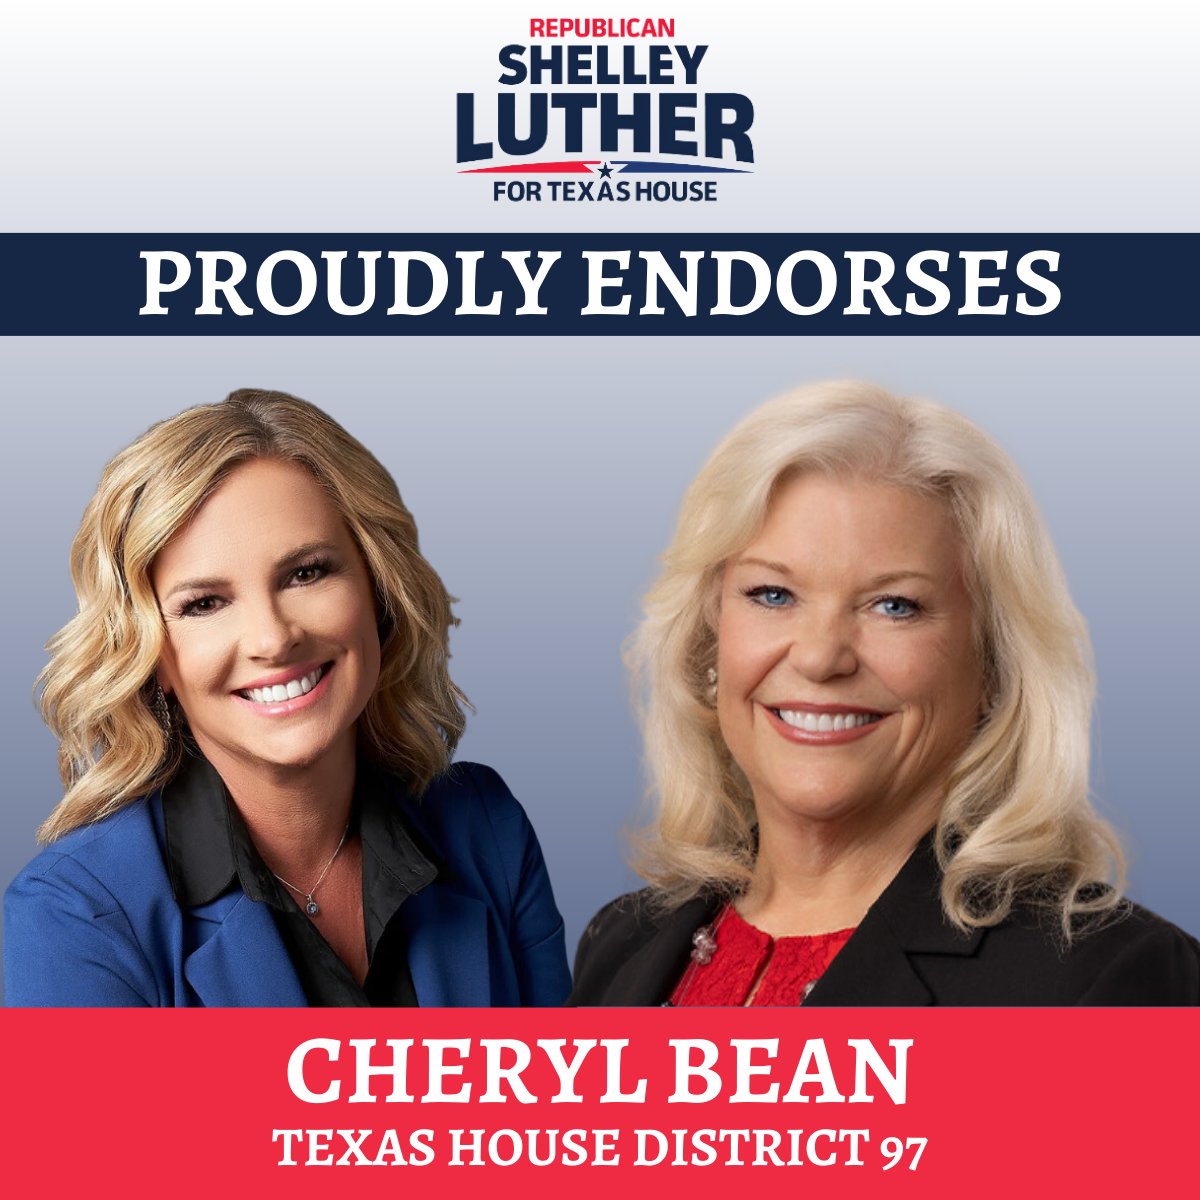 I'm excited to endorse a GREAT Conservative Republican, @cherylbeantx! She is exactly who we need in the Texas House, and I will be honored to work together with her to pass Republican priorities. #MakeTheTexasHouseRepublicanAgain #txlege